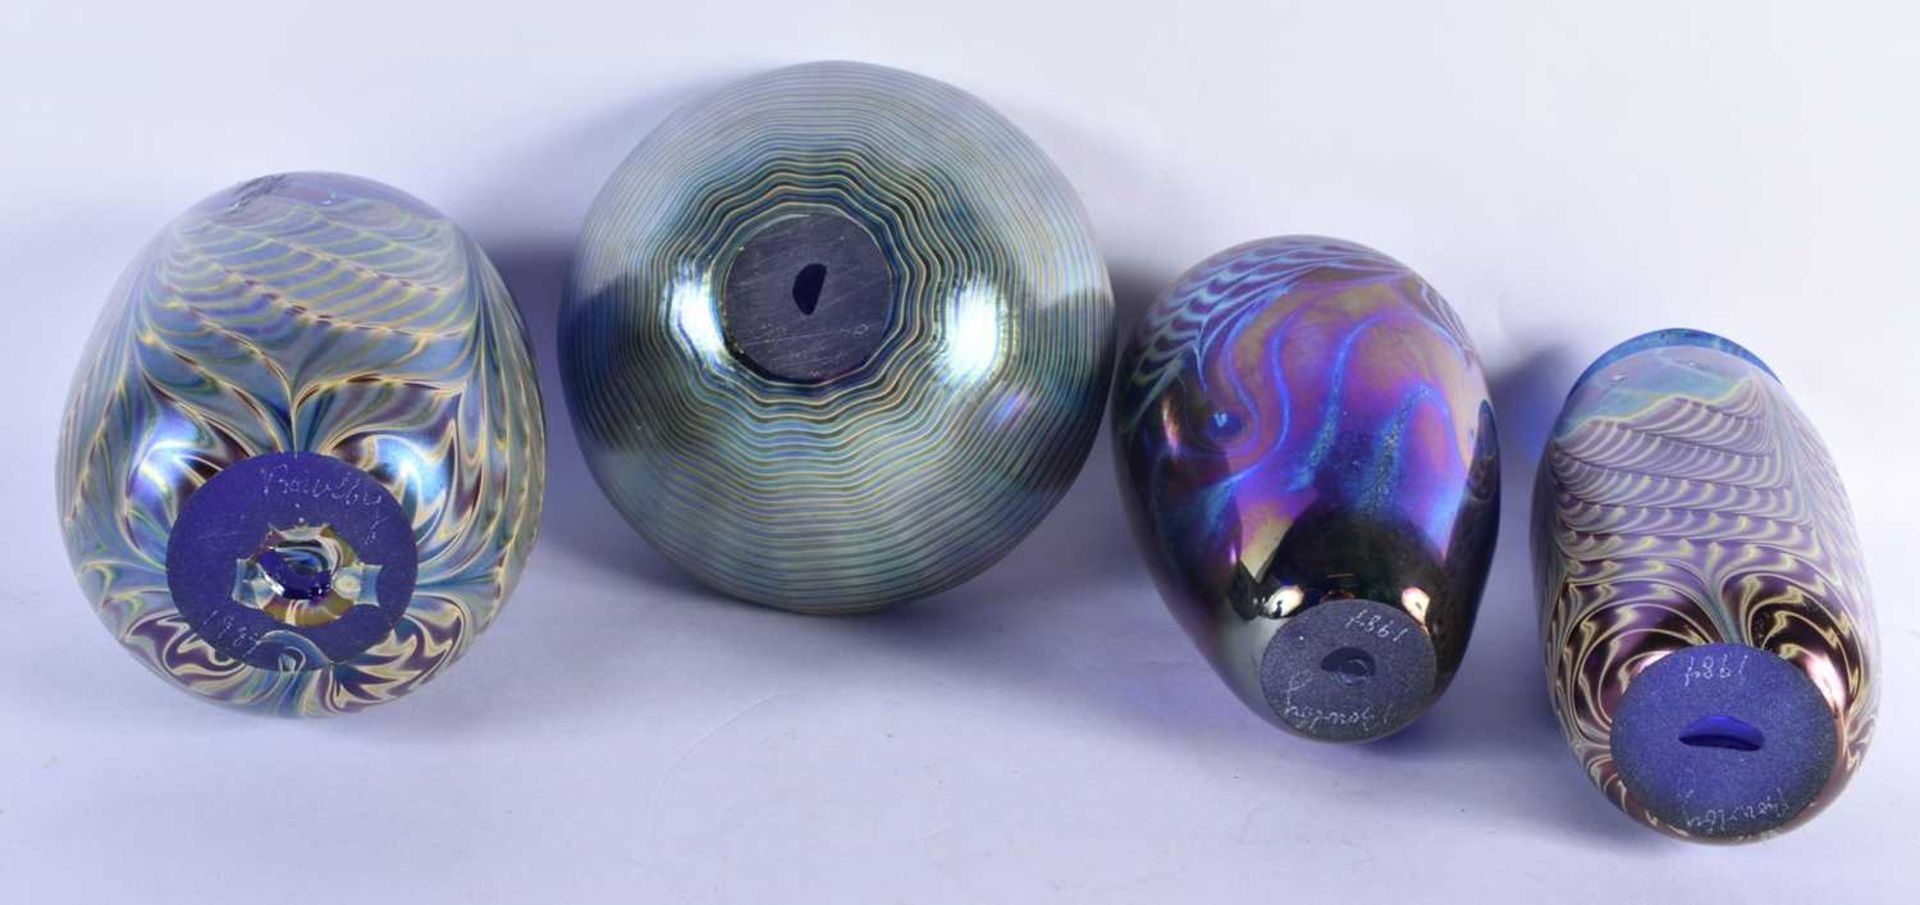 FOUR IRIDESCENT ART GLASS VASES. Largest 22 cm high. (4) - Image 4 of 4